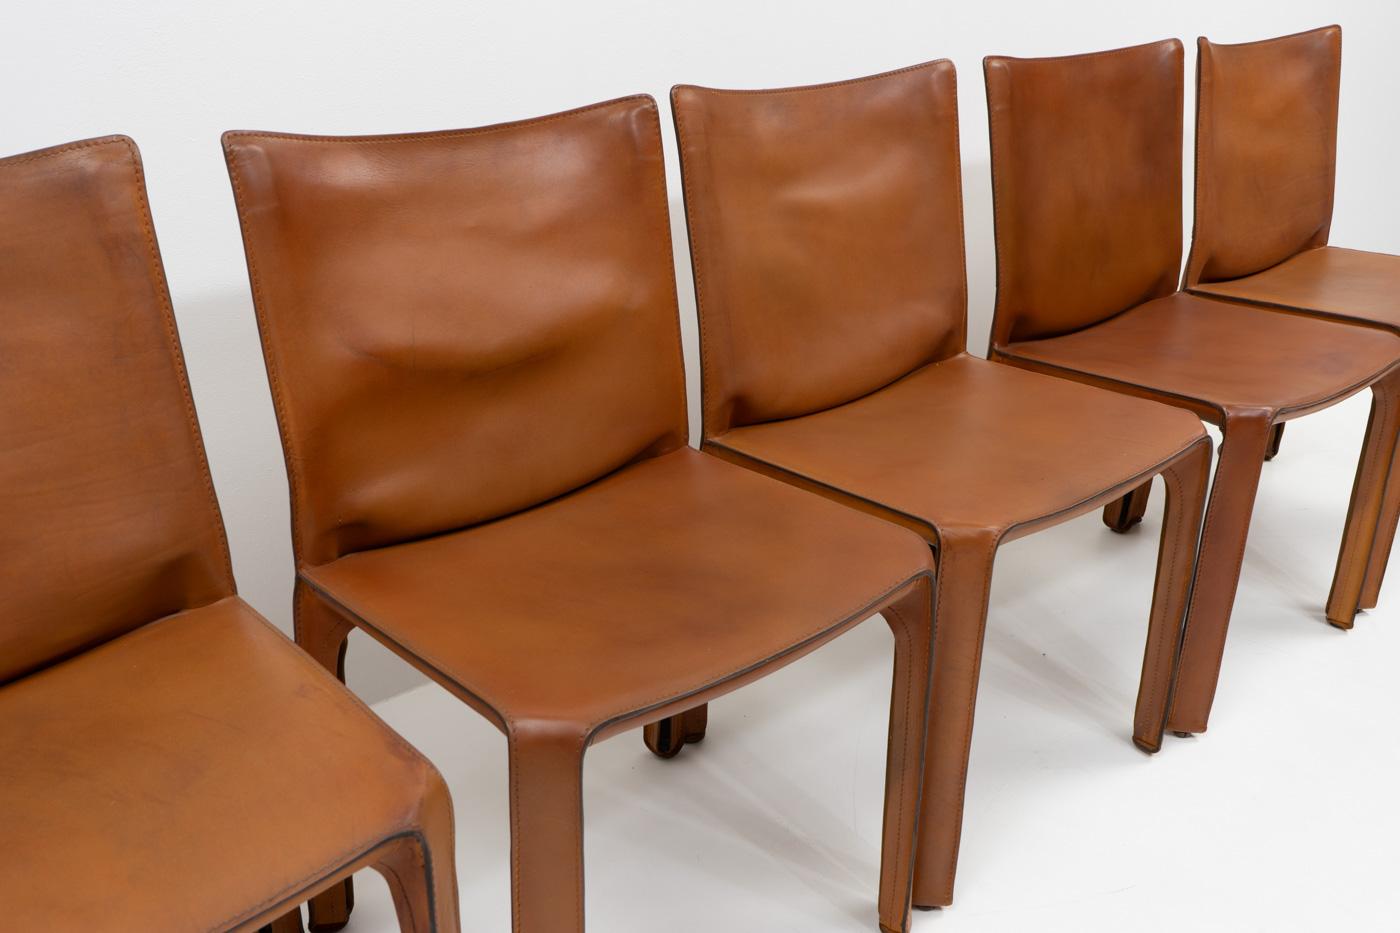 Italian Design Classic Cab 412 Chairs by Mario Bellini for Cassina, Set of Six For Sale 1